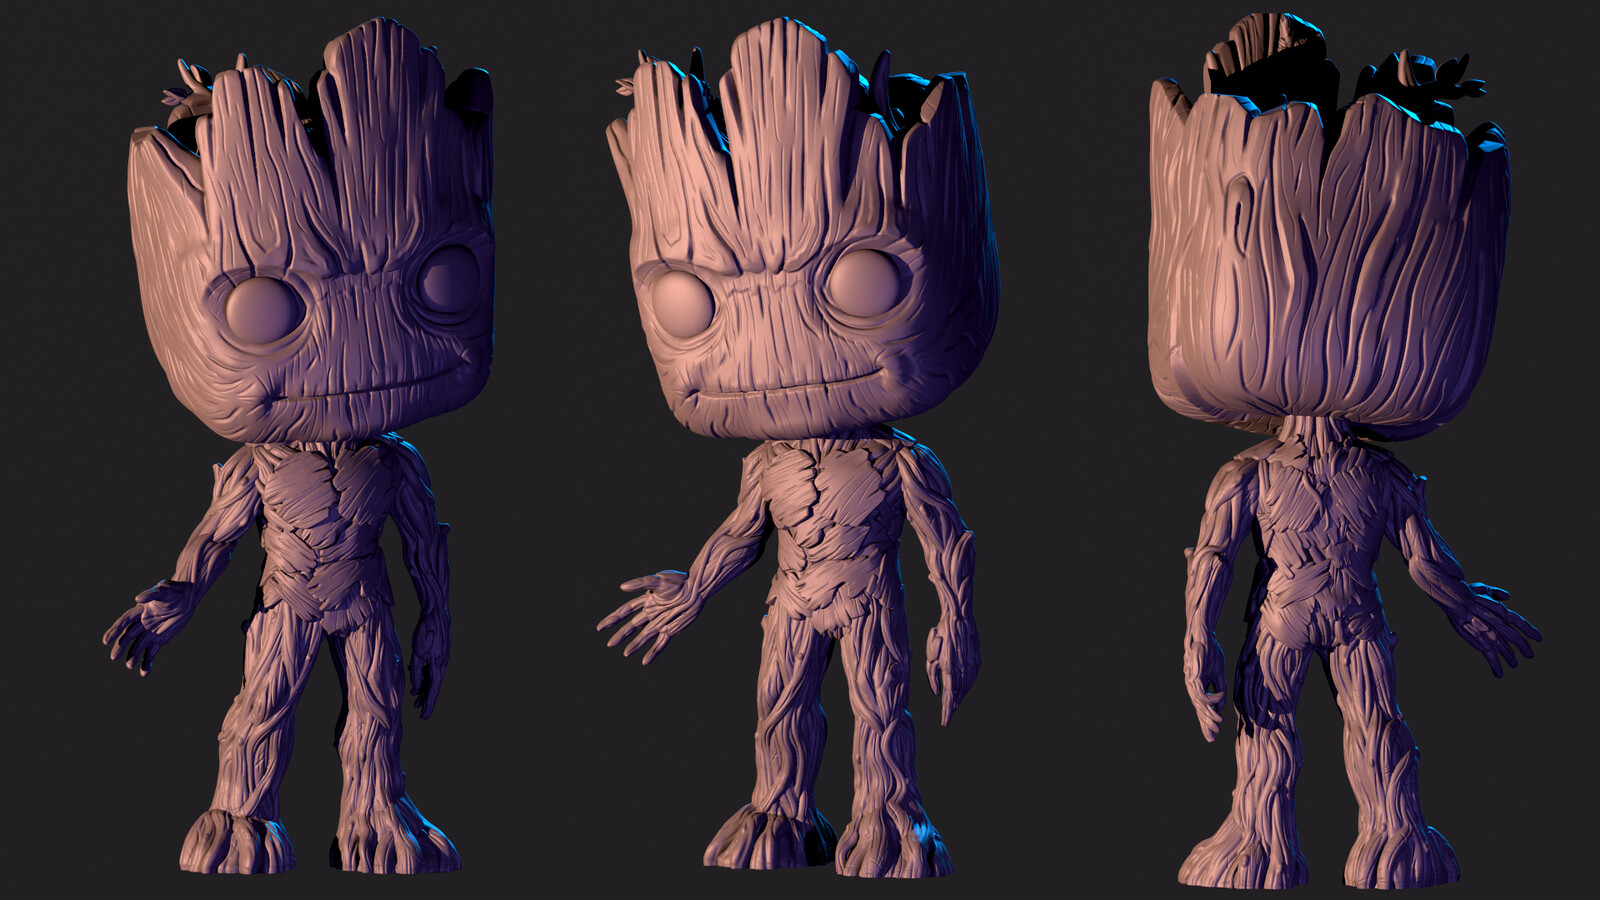 Groot Statue for Funko's Hollywood Location